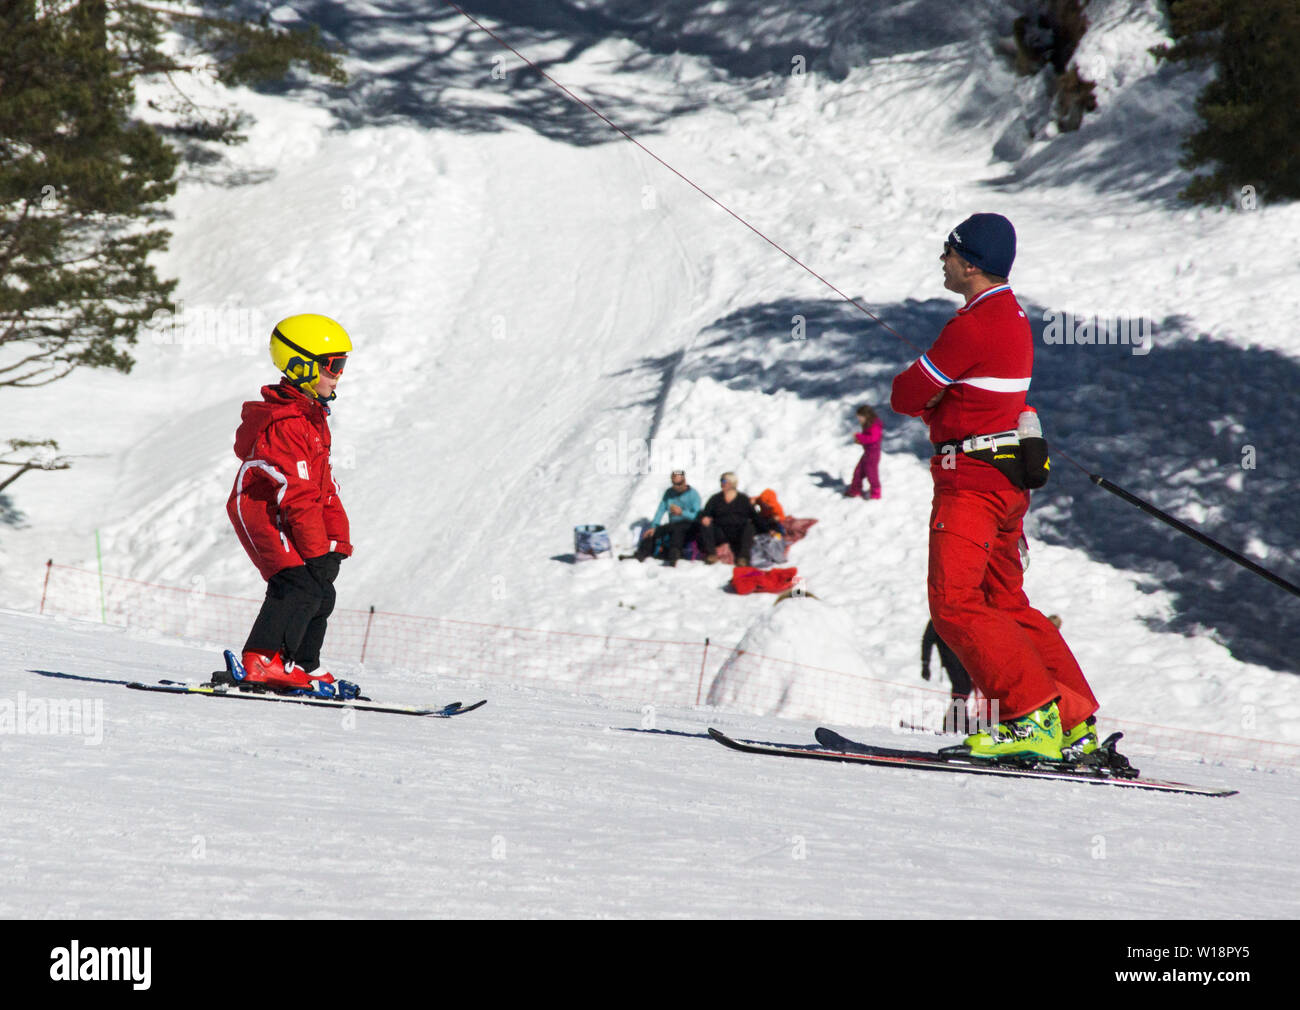 The central Pyrenees at Pont Espagne. Young boy learning to ski with the help of a qualified ski instructor. Stock Photo